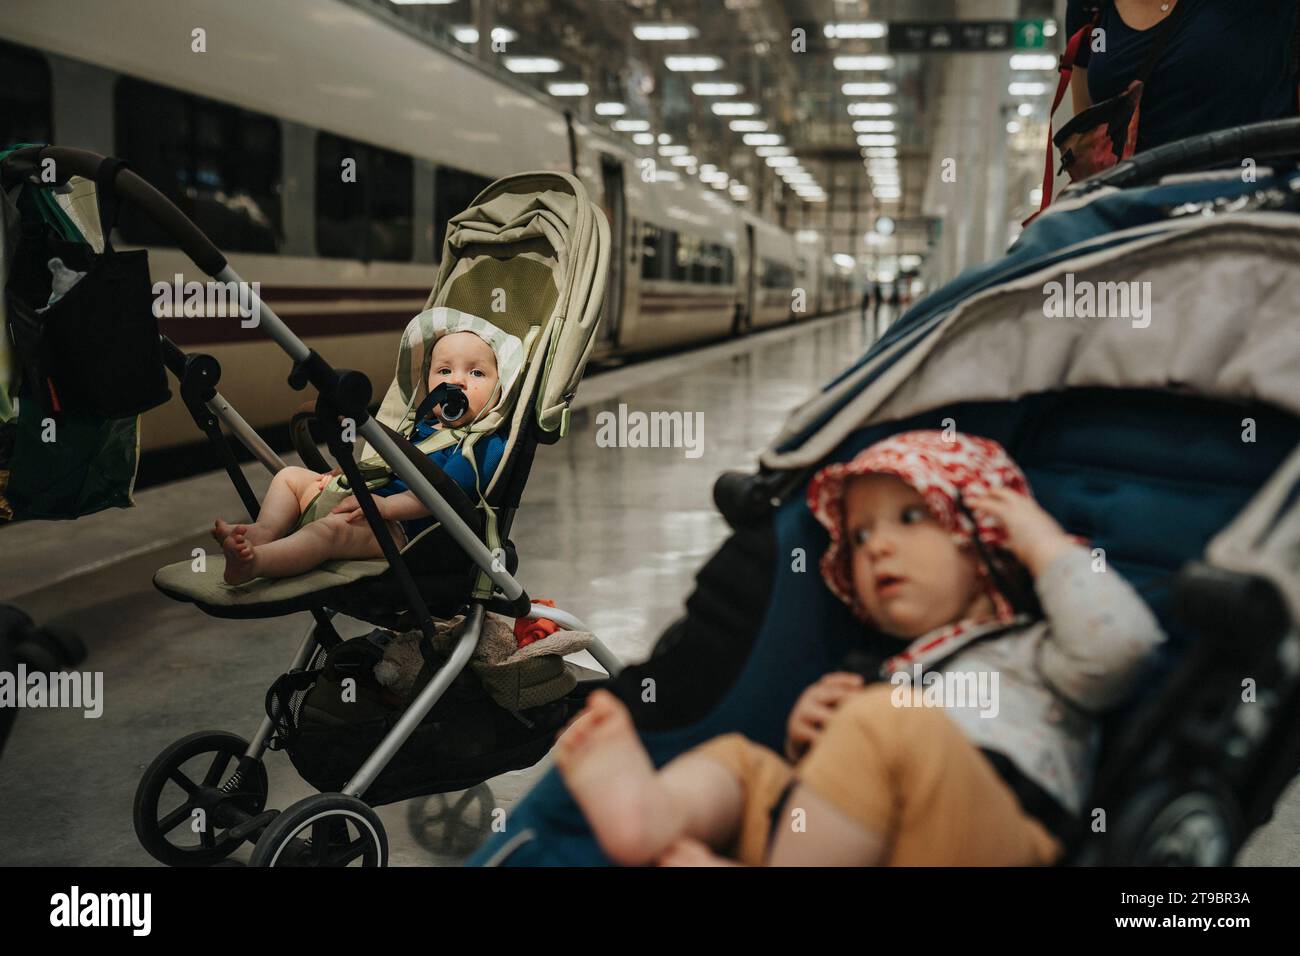 Babies in strollers at train station Stock Photo